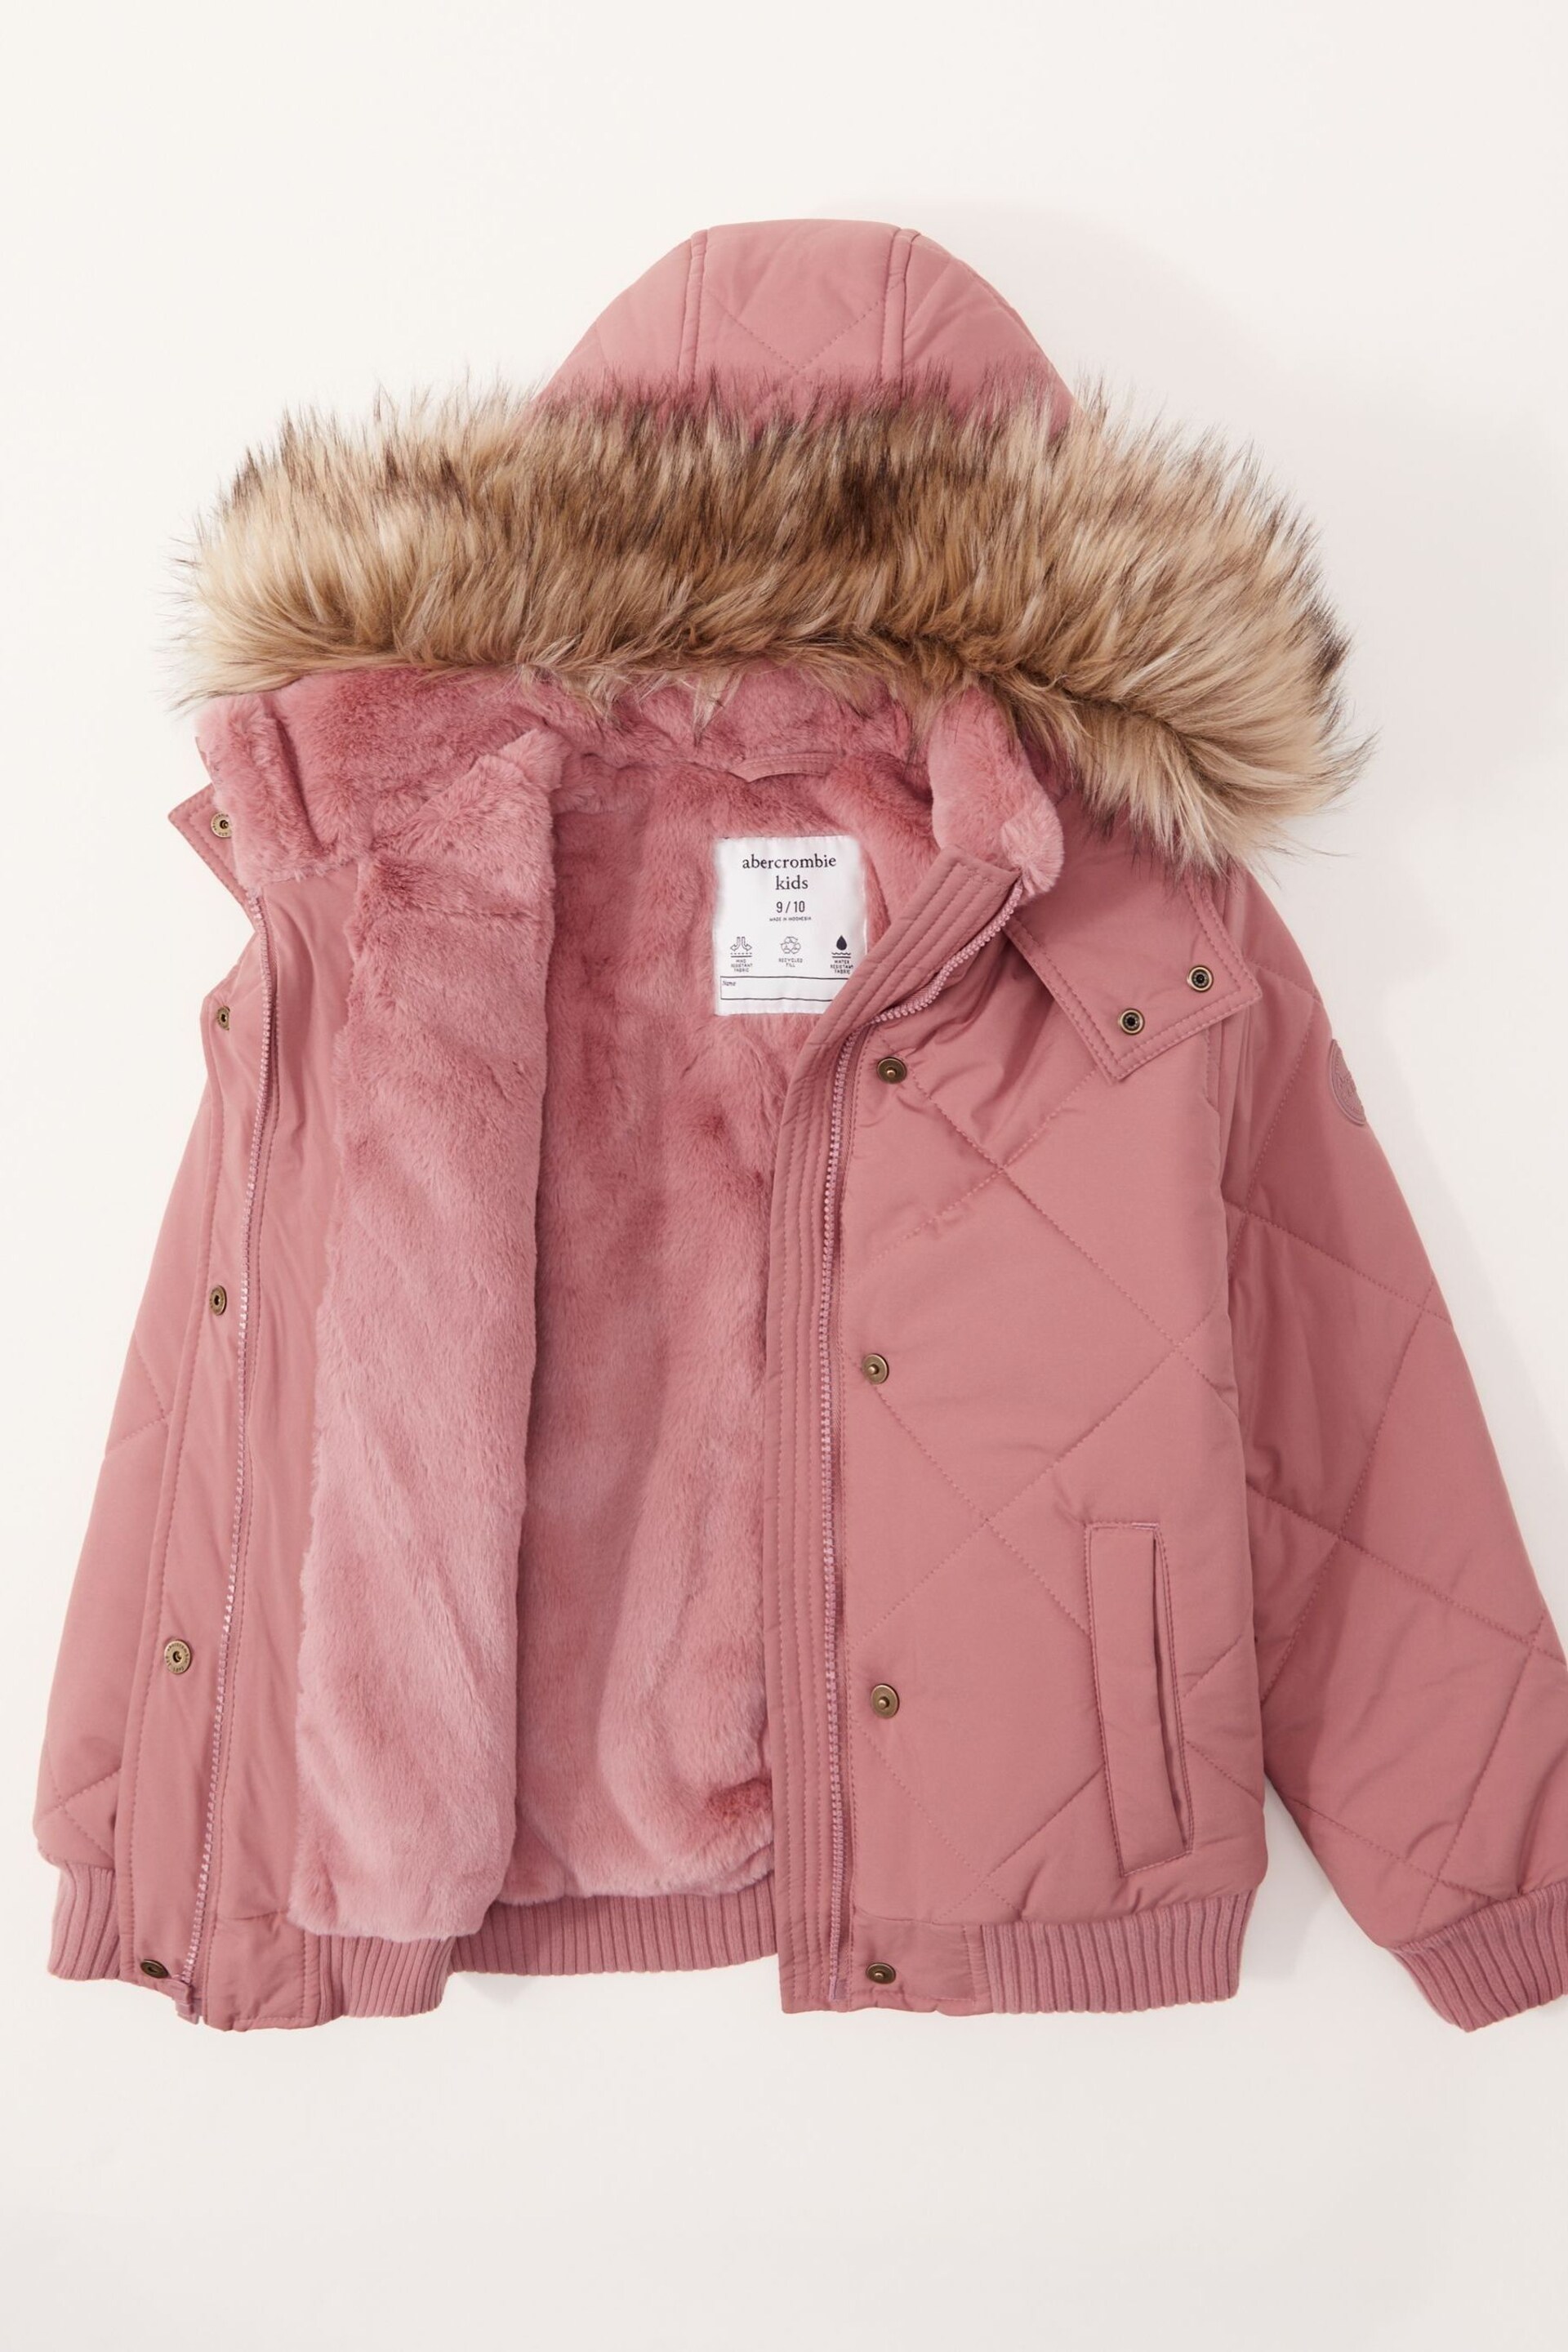 Abercrombie & Fitch Faux Fur Padded Coat - Image 3 of 8